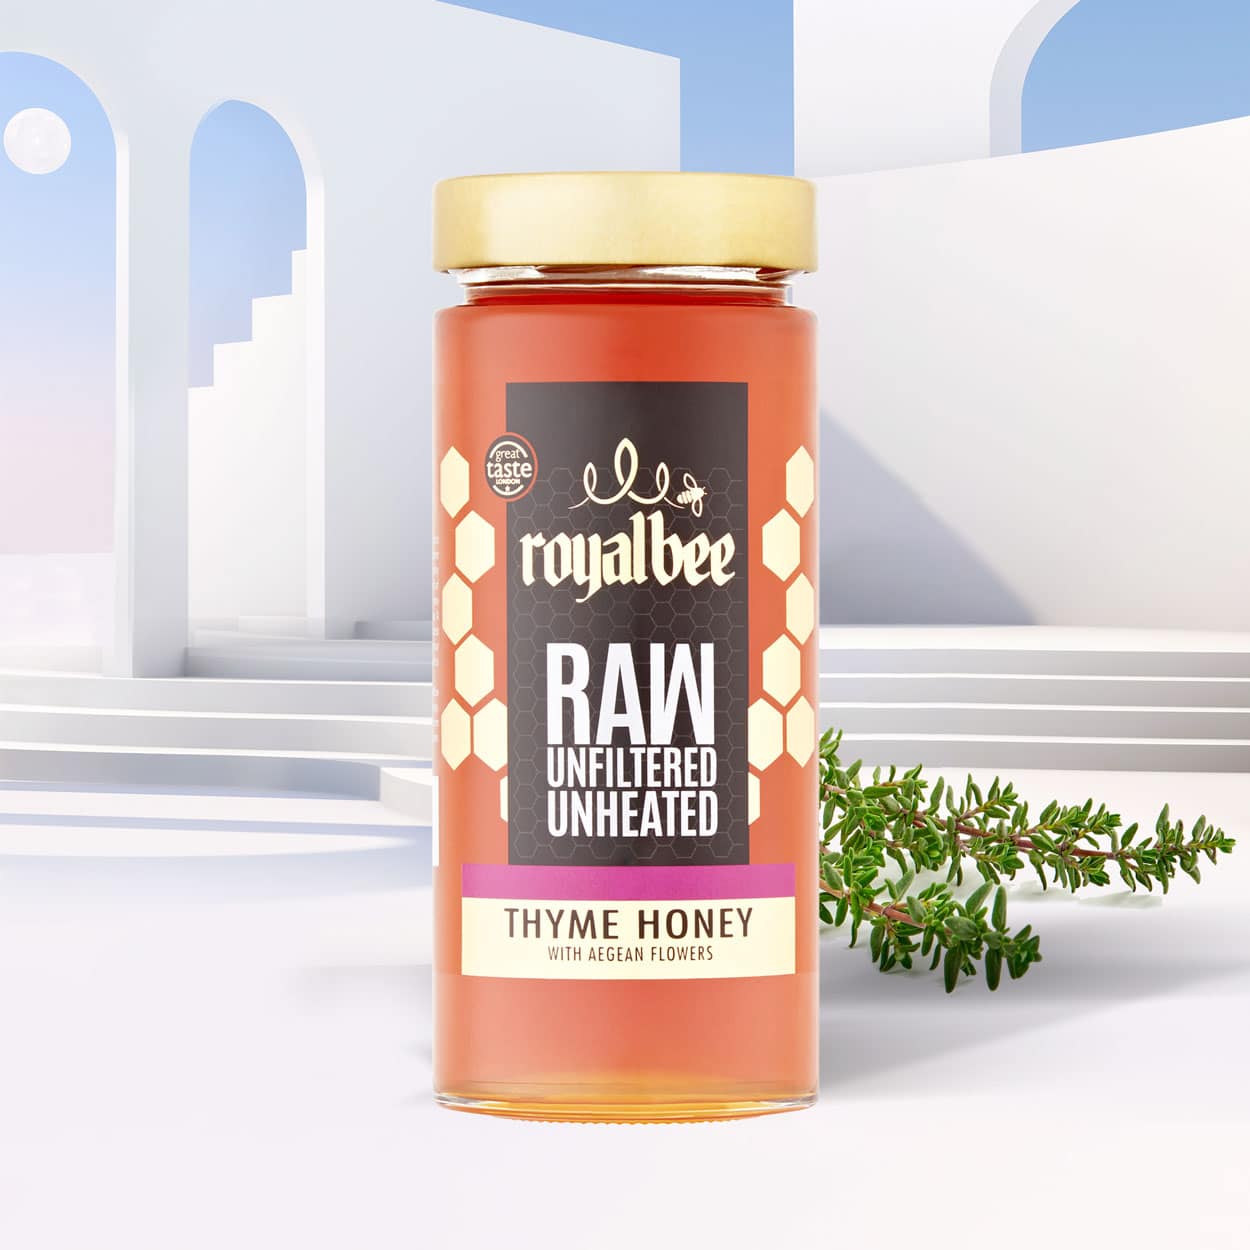 Thyme Honey with Aegean Flowers 400g